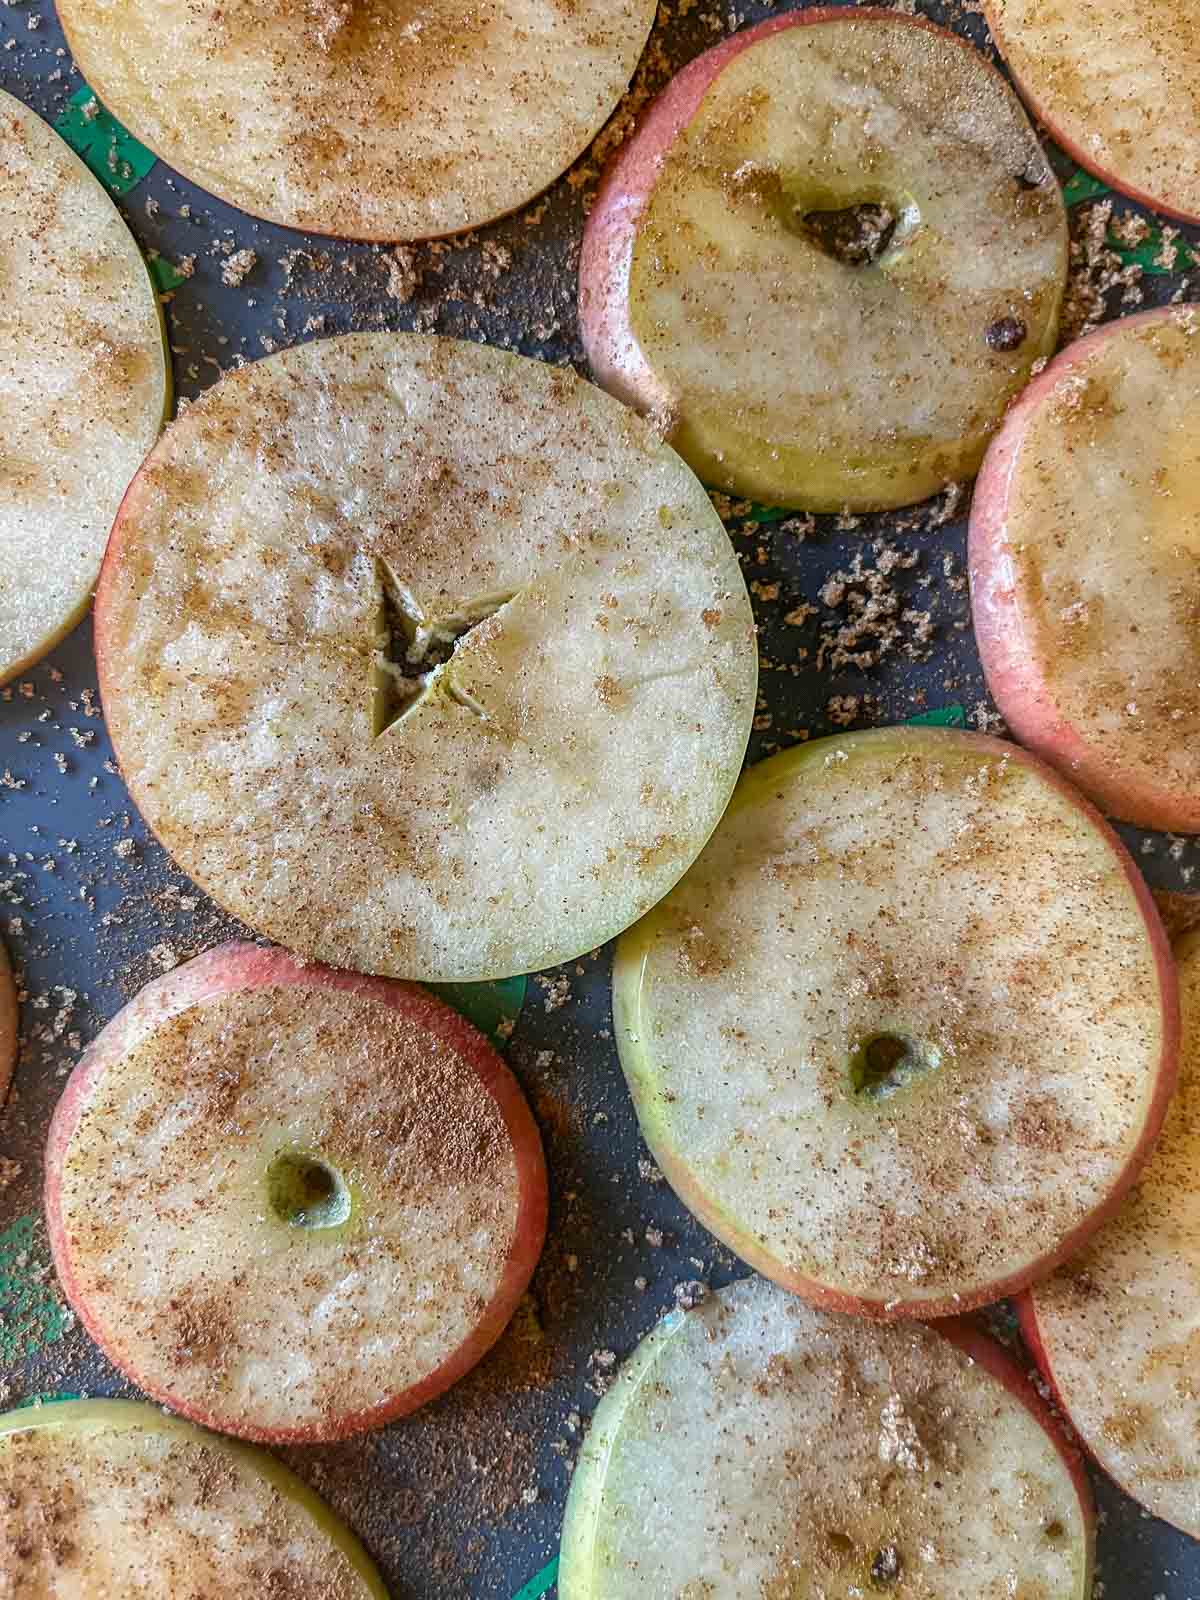 sliced apples on freeze dryer tray sprinkled with brown sugar and spices